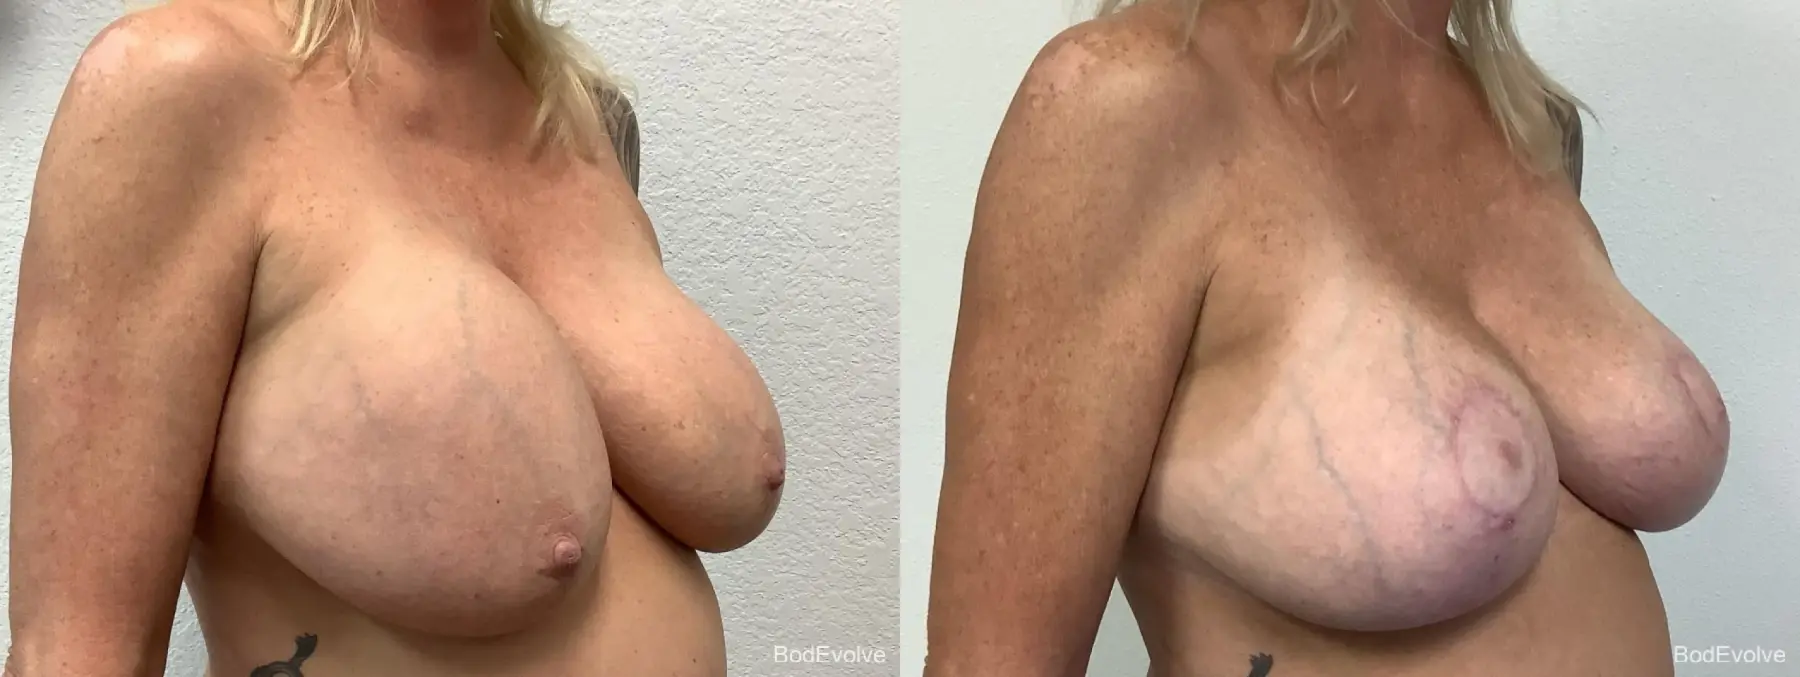 Breast Augmentation With Lift: Patient 3 - Before and After 4